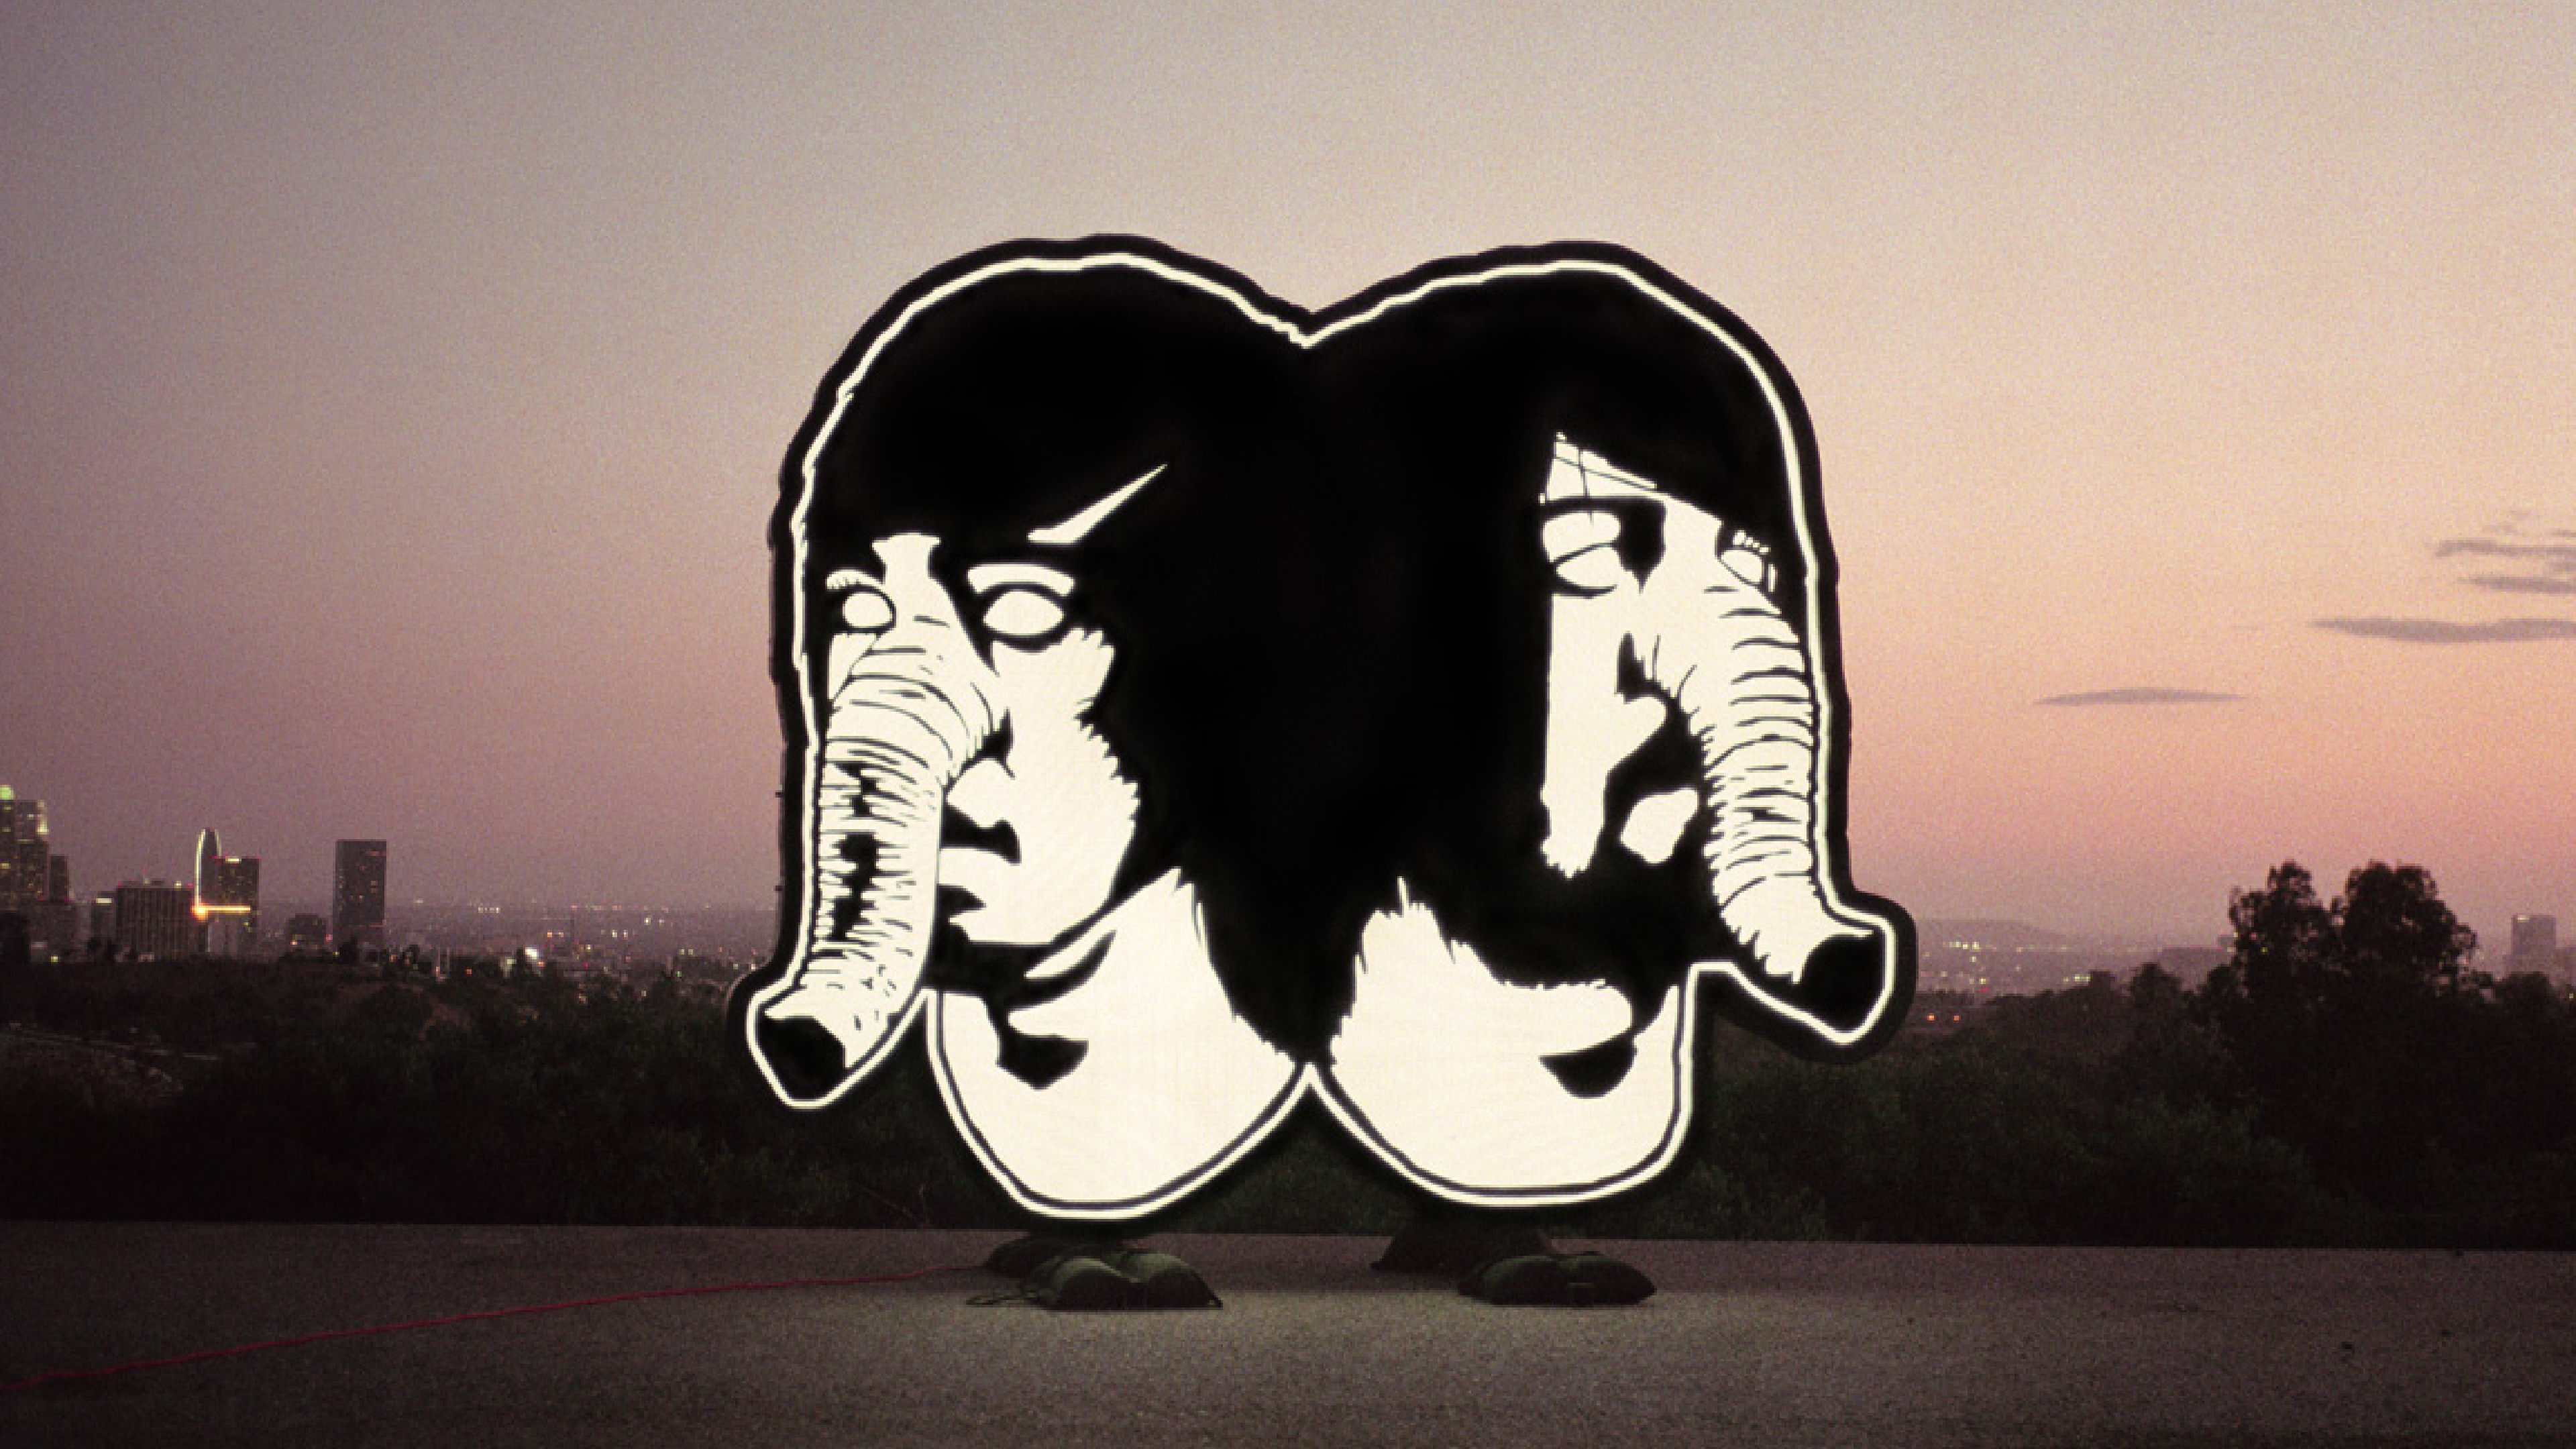 Death From Above 1979 Physical World [3840x2160] [OC]